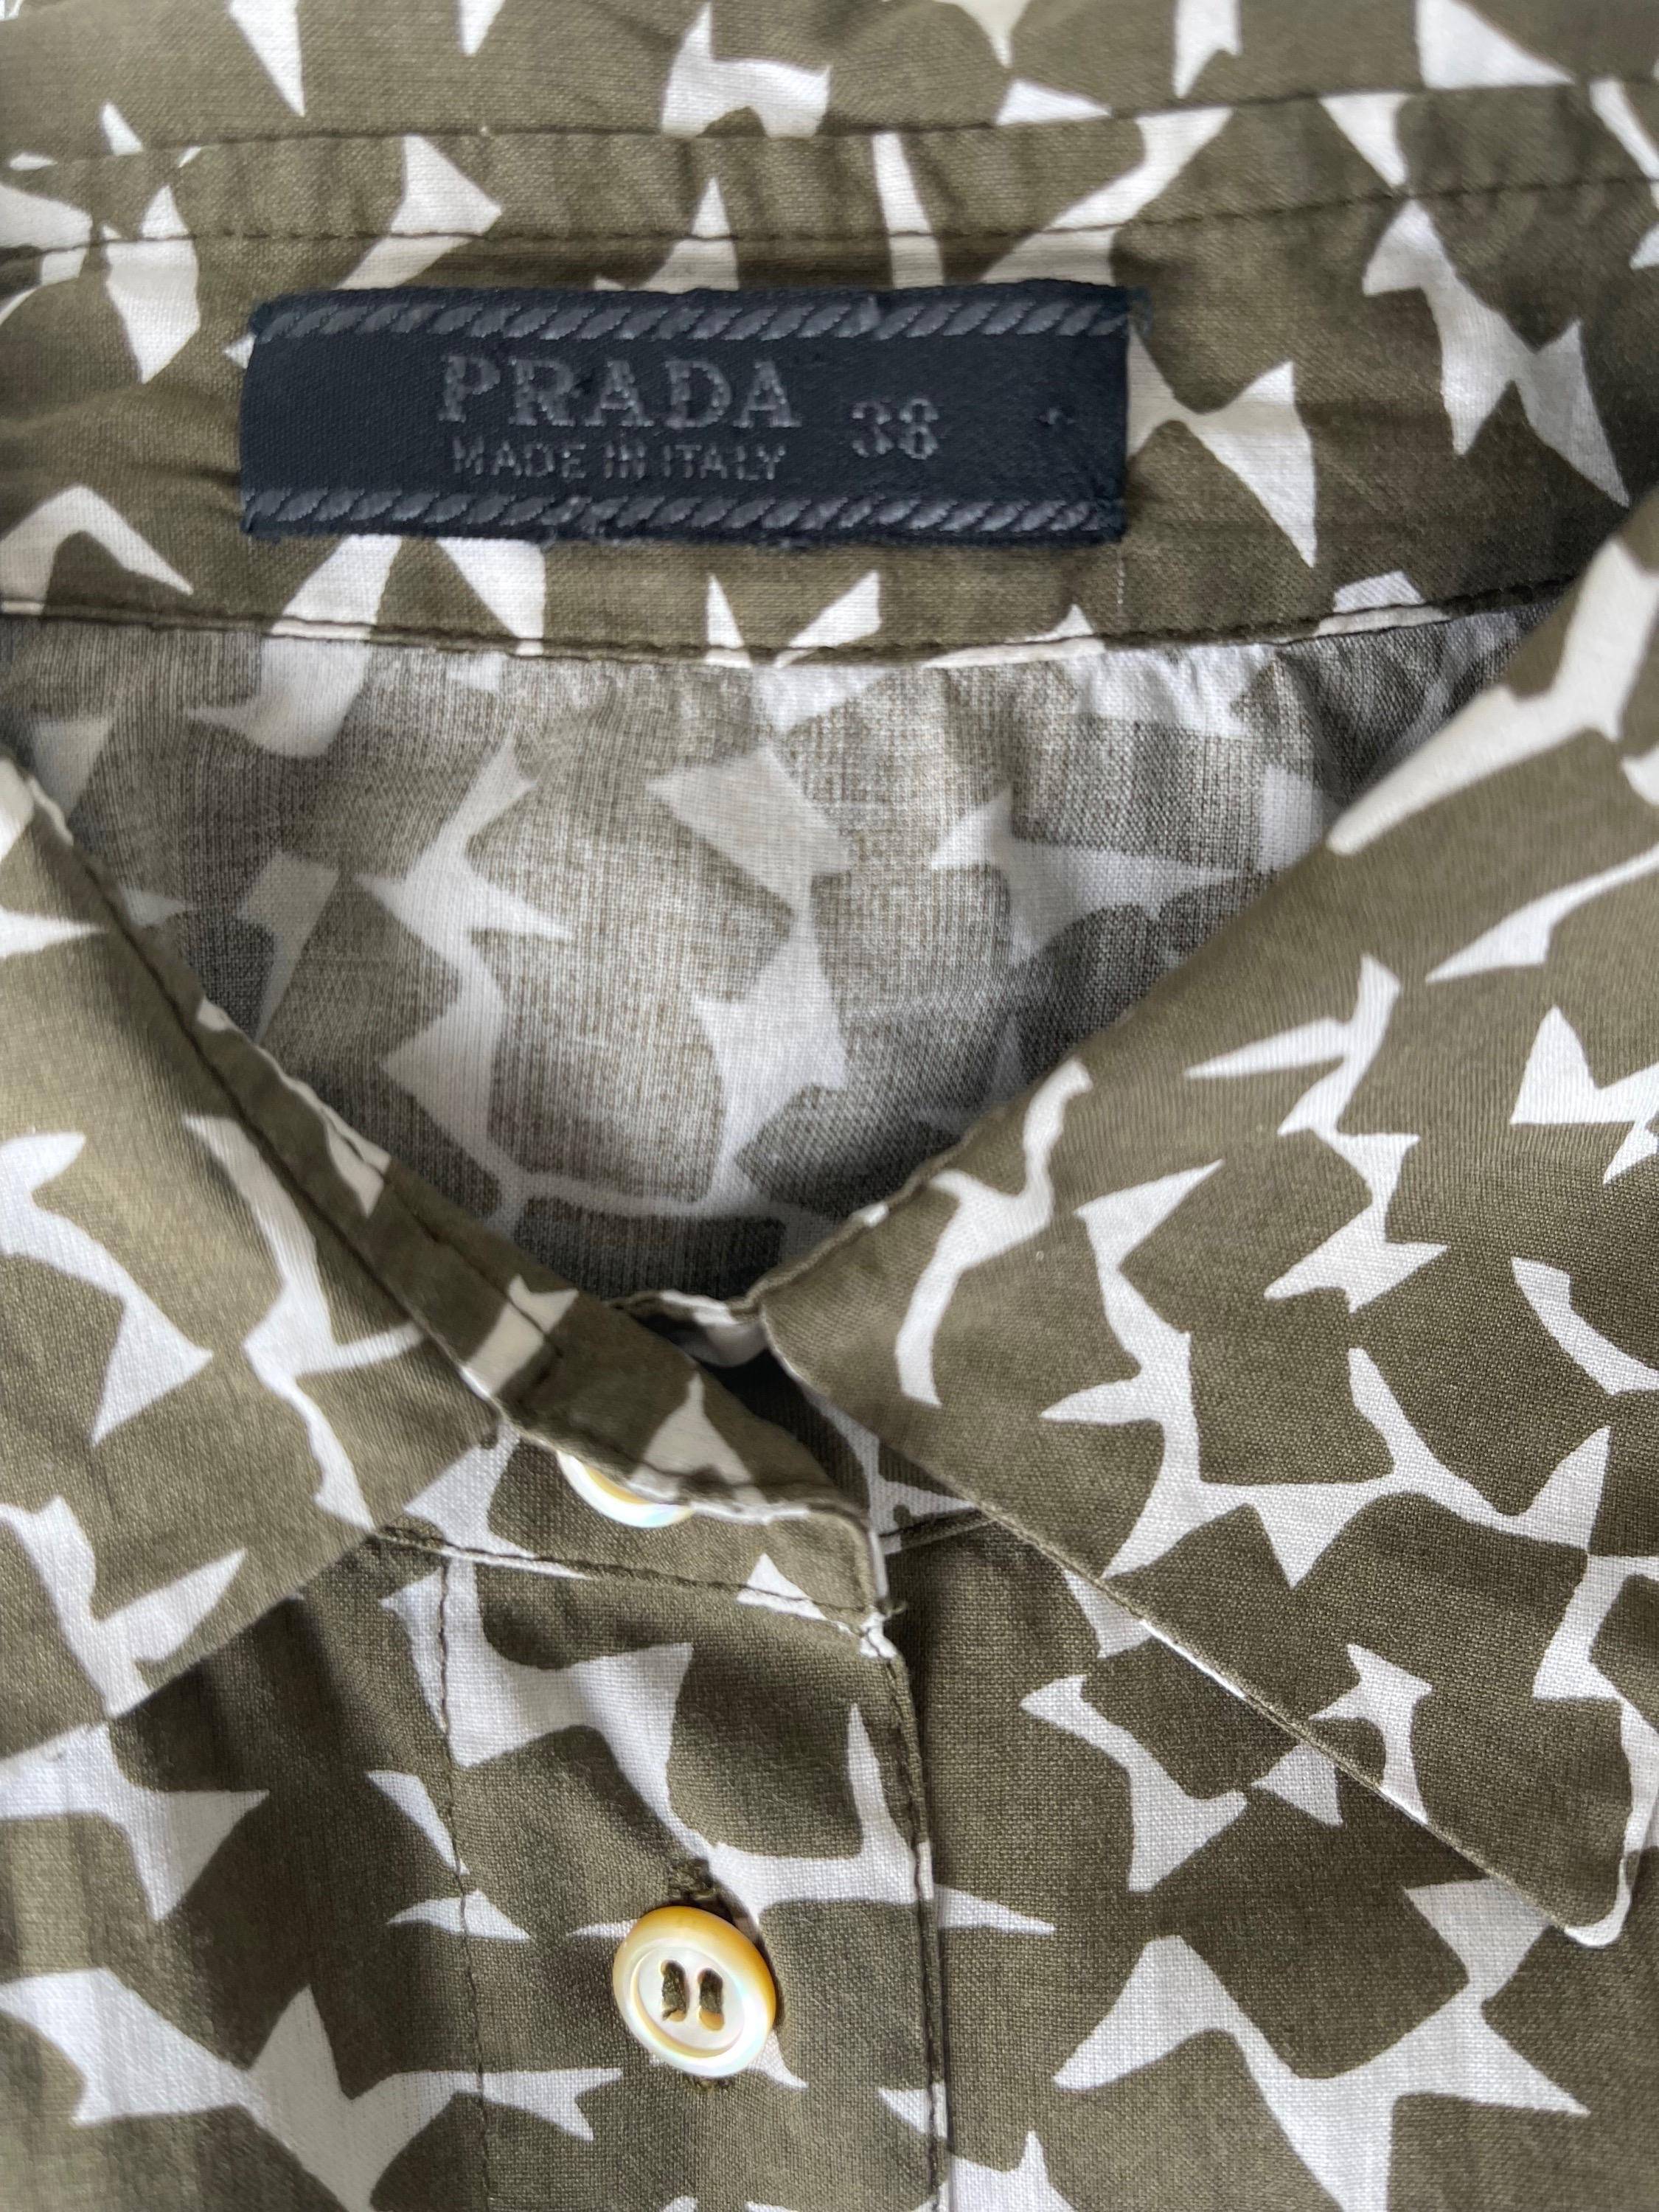 Chic PRADA Spring 2002 hunter green and white 3/4 sleeves button up blouse ! Features abstract prints with the Prada logo printed between throughout. Pair with jeans, shorts, trousers or a skirt.
In great condition 
Made in Italy
Marked Size